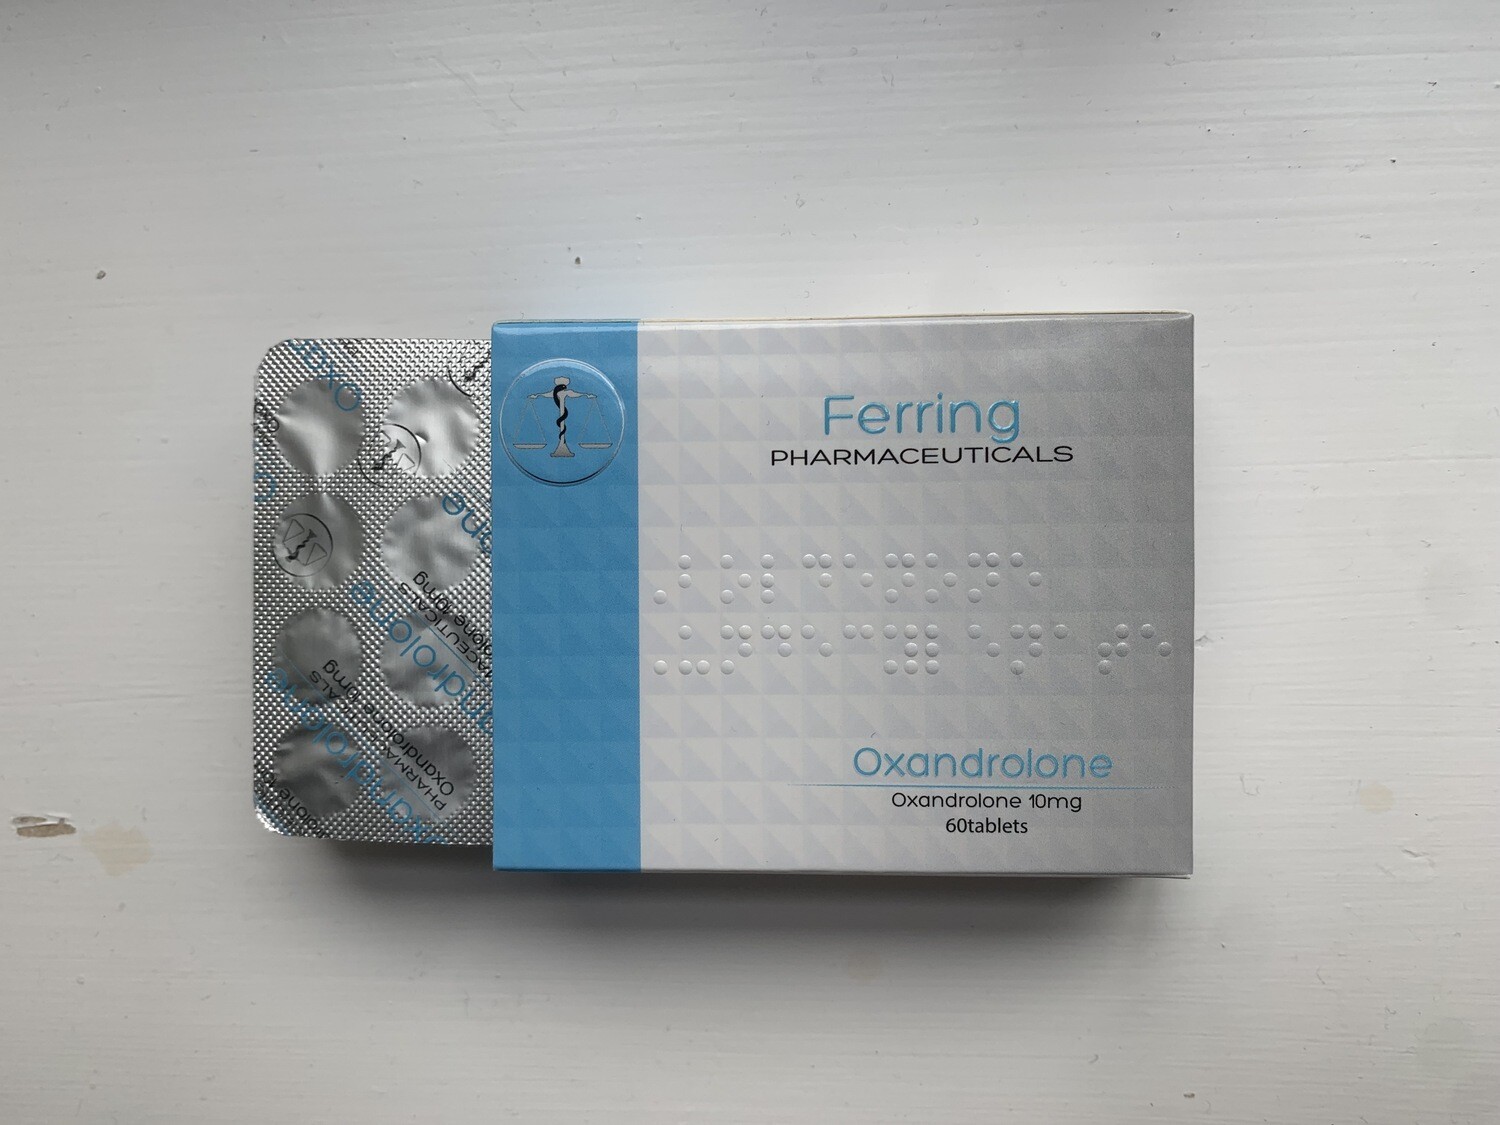 FERRING PHARMACEUTICALS - Oxandrolone 10mg x 60 tablets